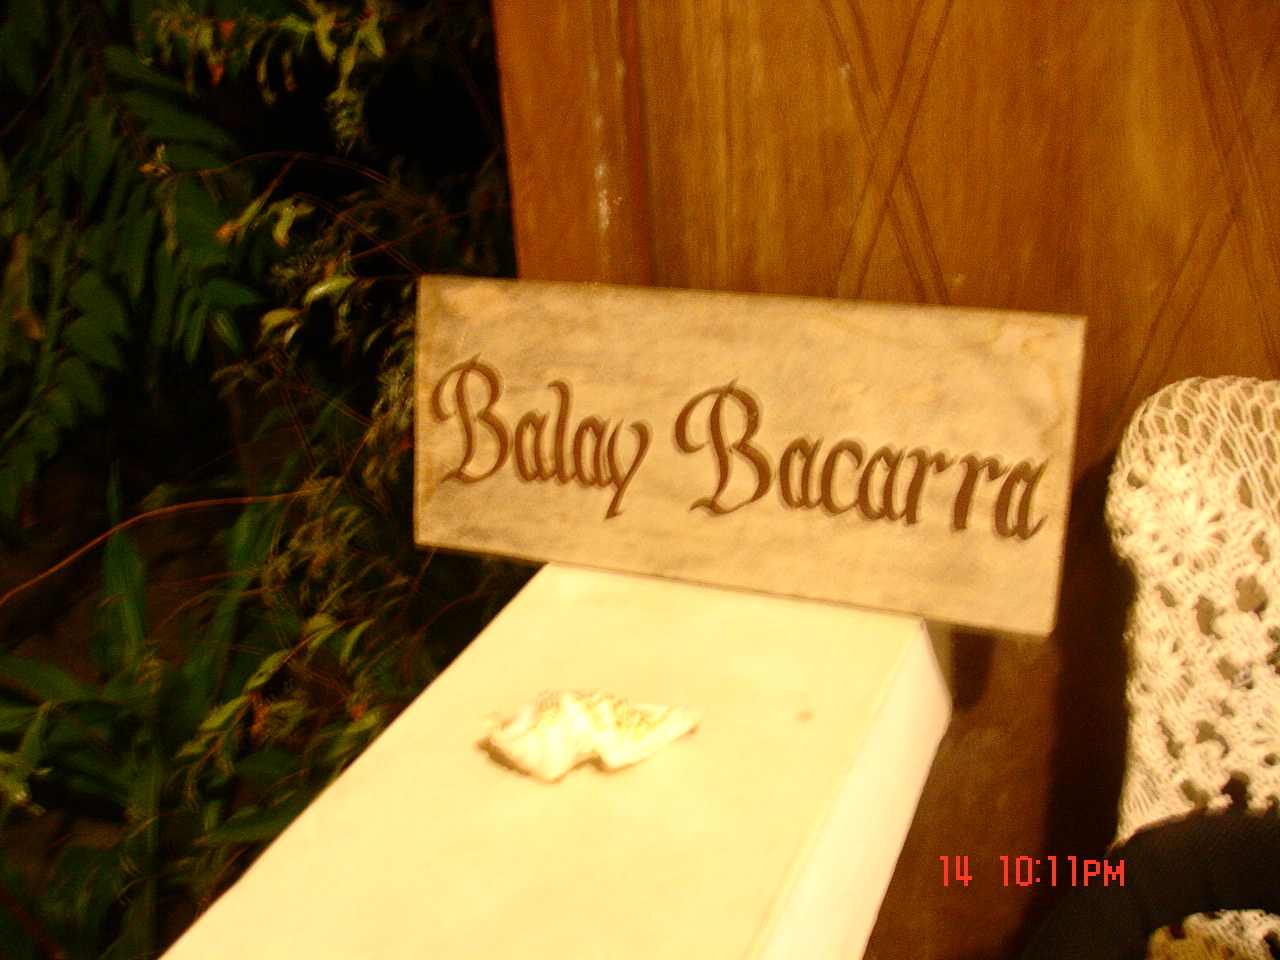 My Lola's family came from Bacarra.